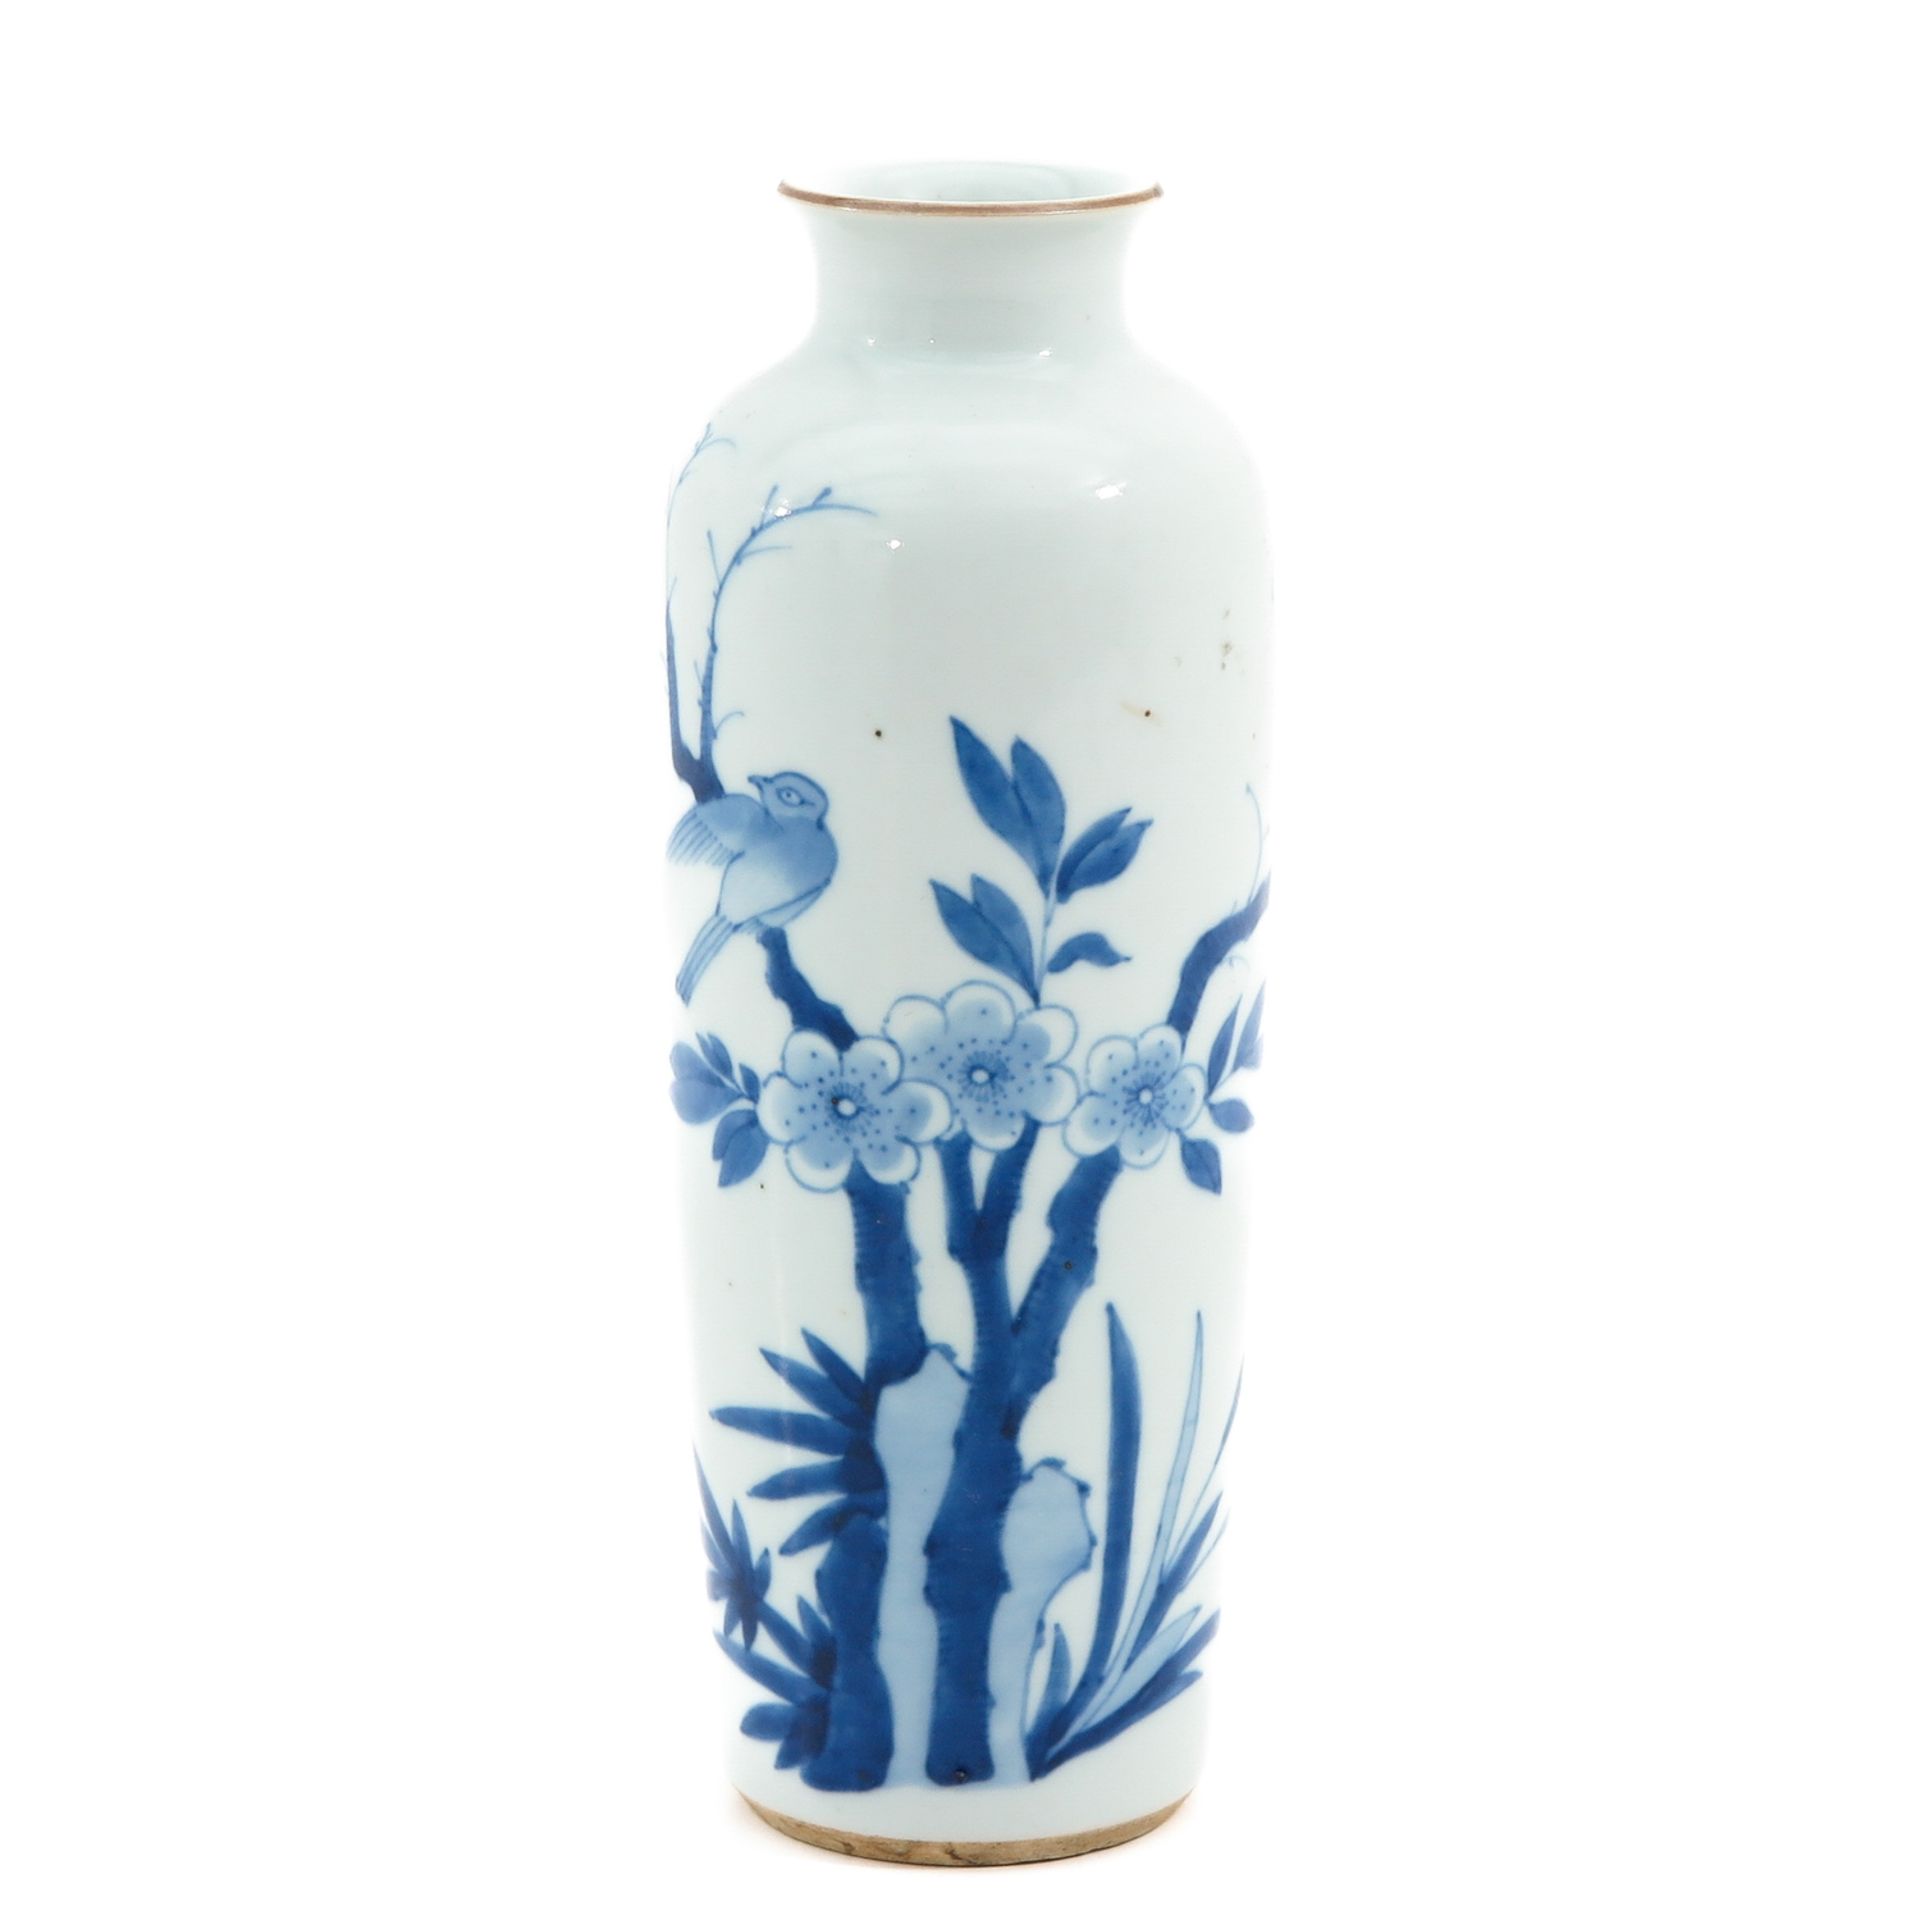 A Blue and White Rolwagen Vase